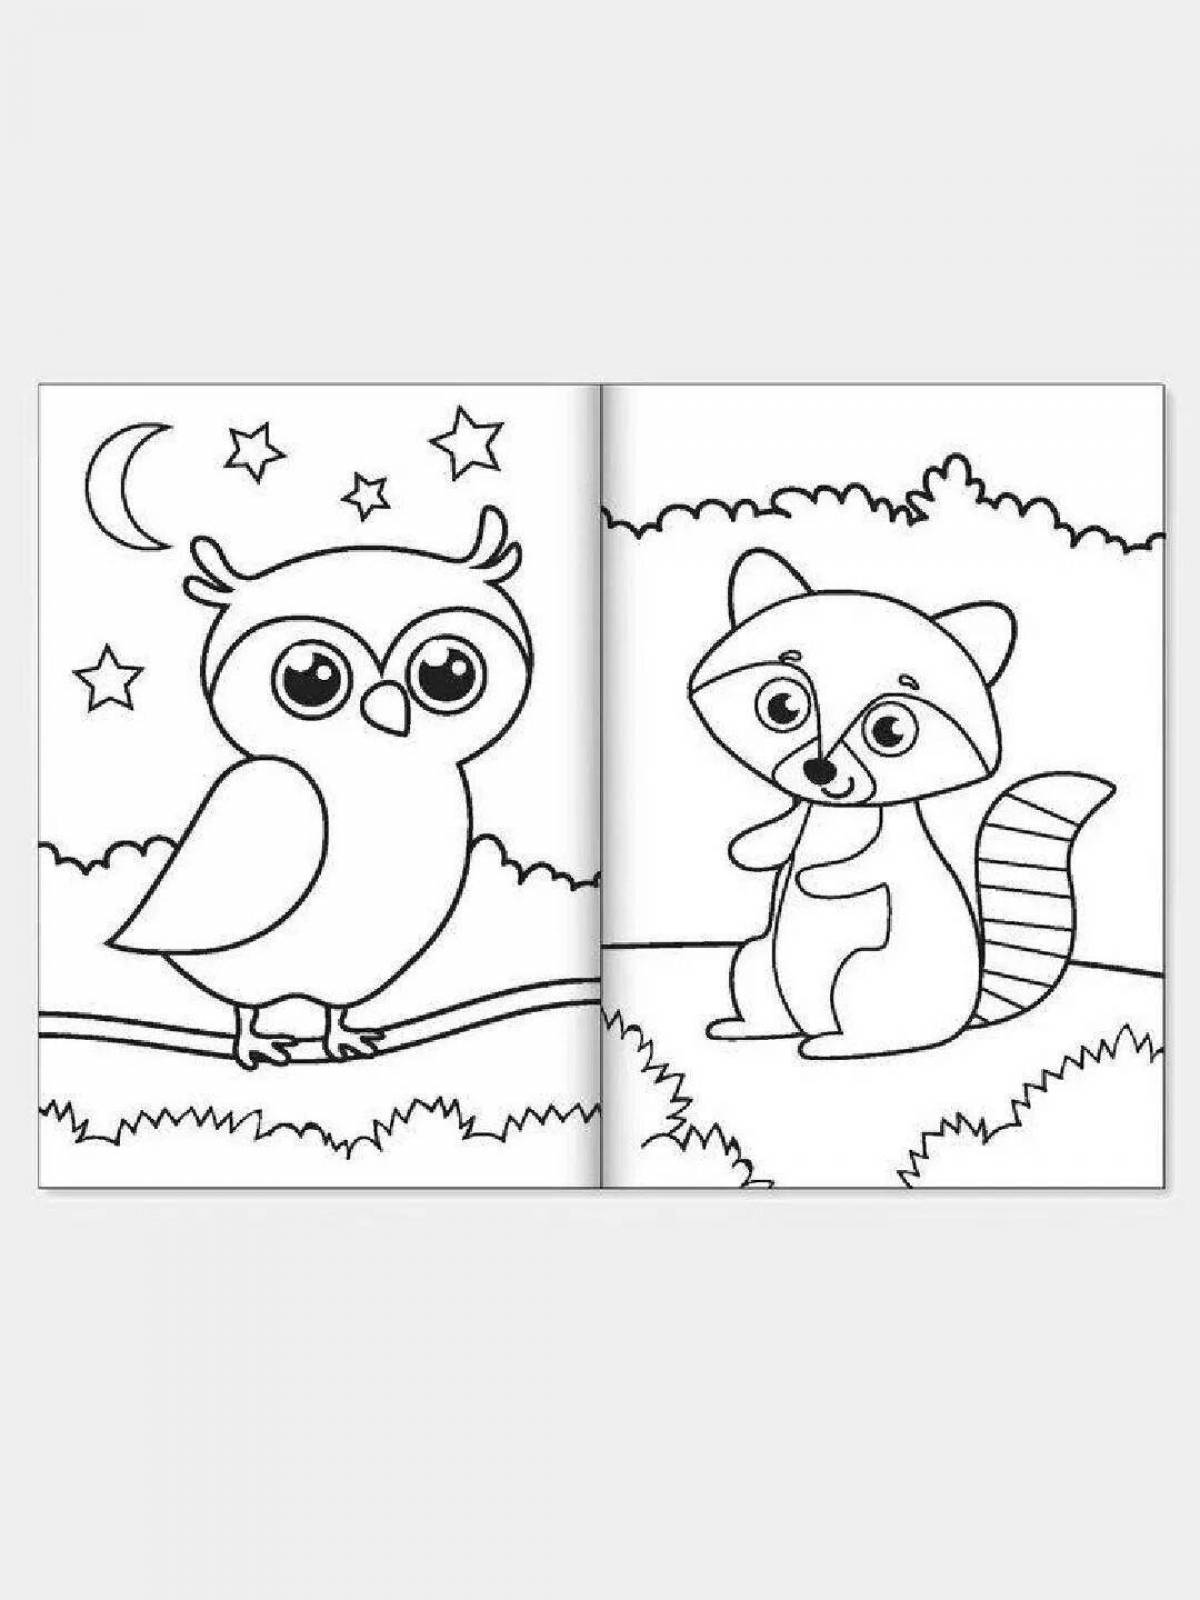 Creative coloring book for 20 year olds